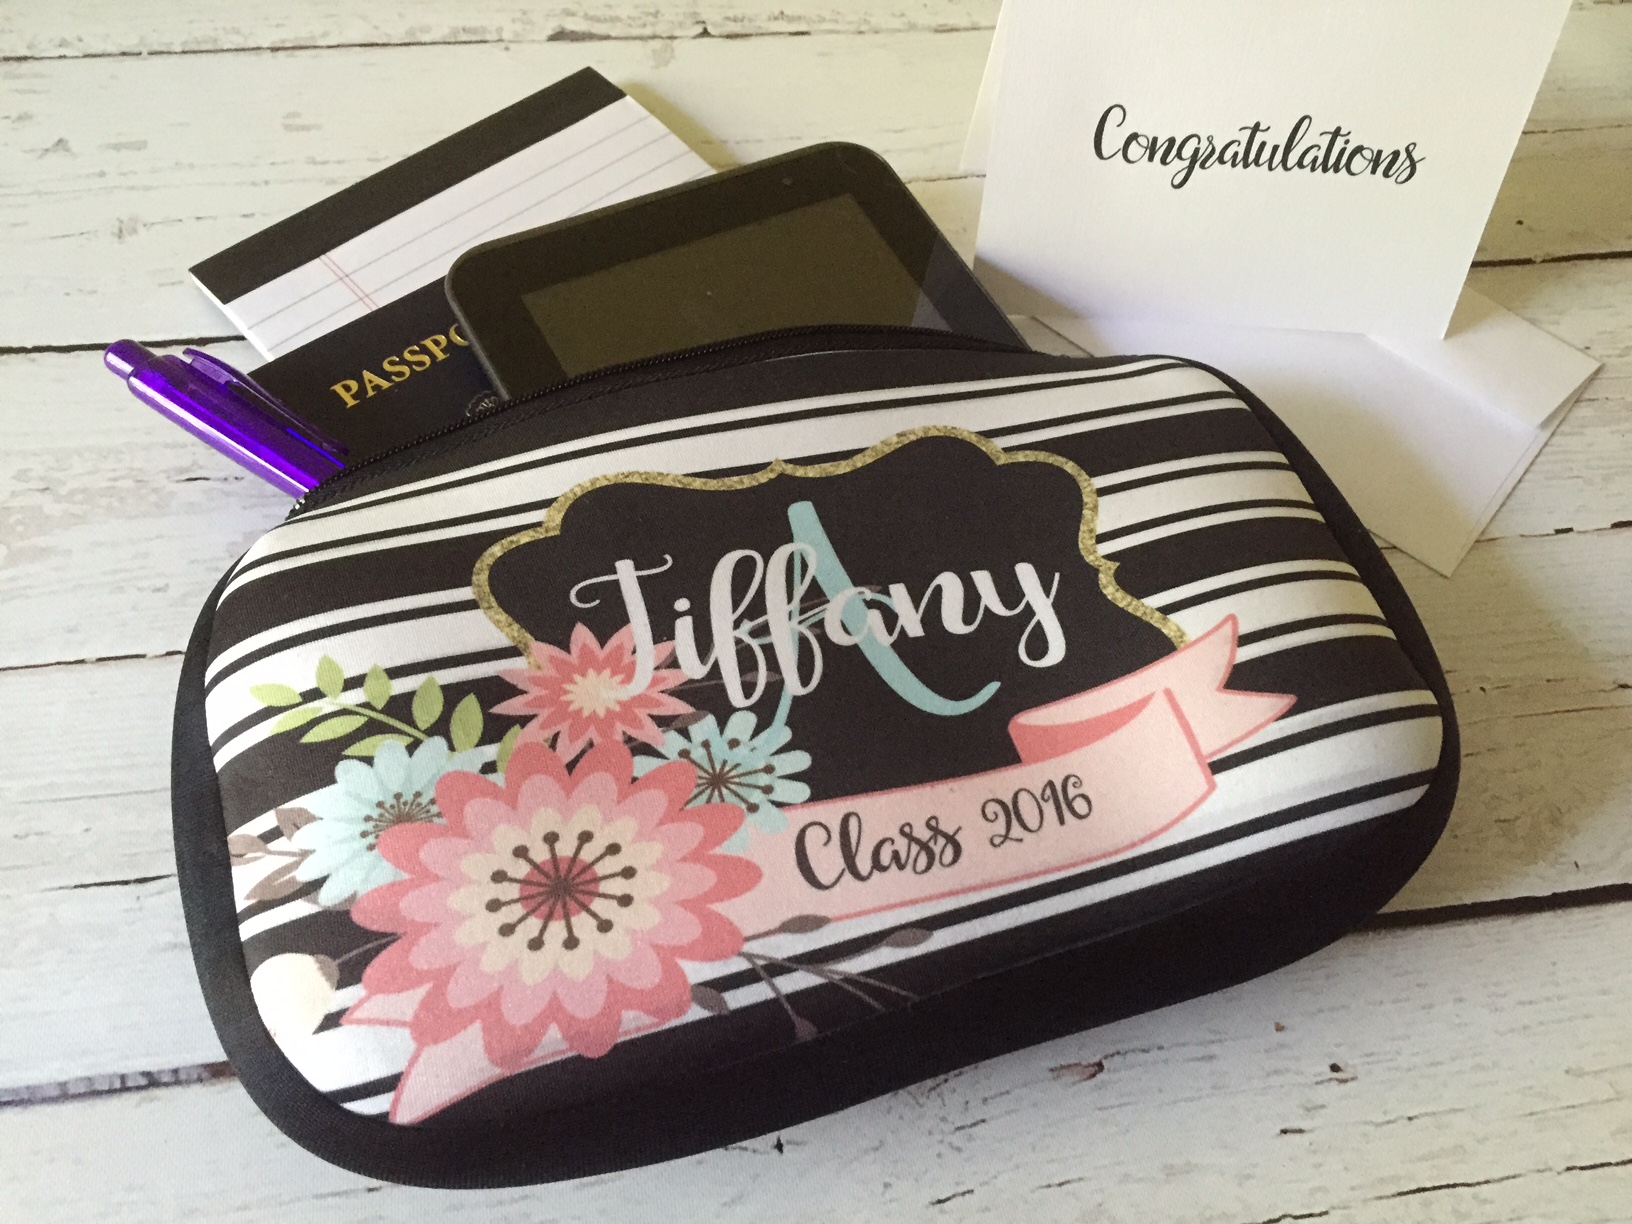 Essential pouch/bag for your grad! Fits any smartphone, notepads, pens and cosmetics... a grab 